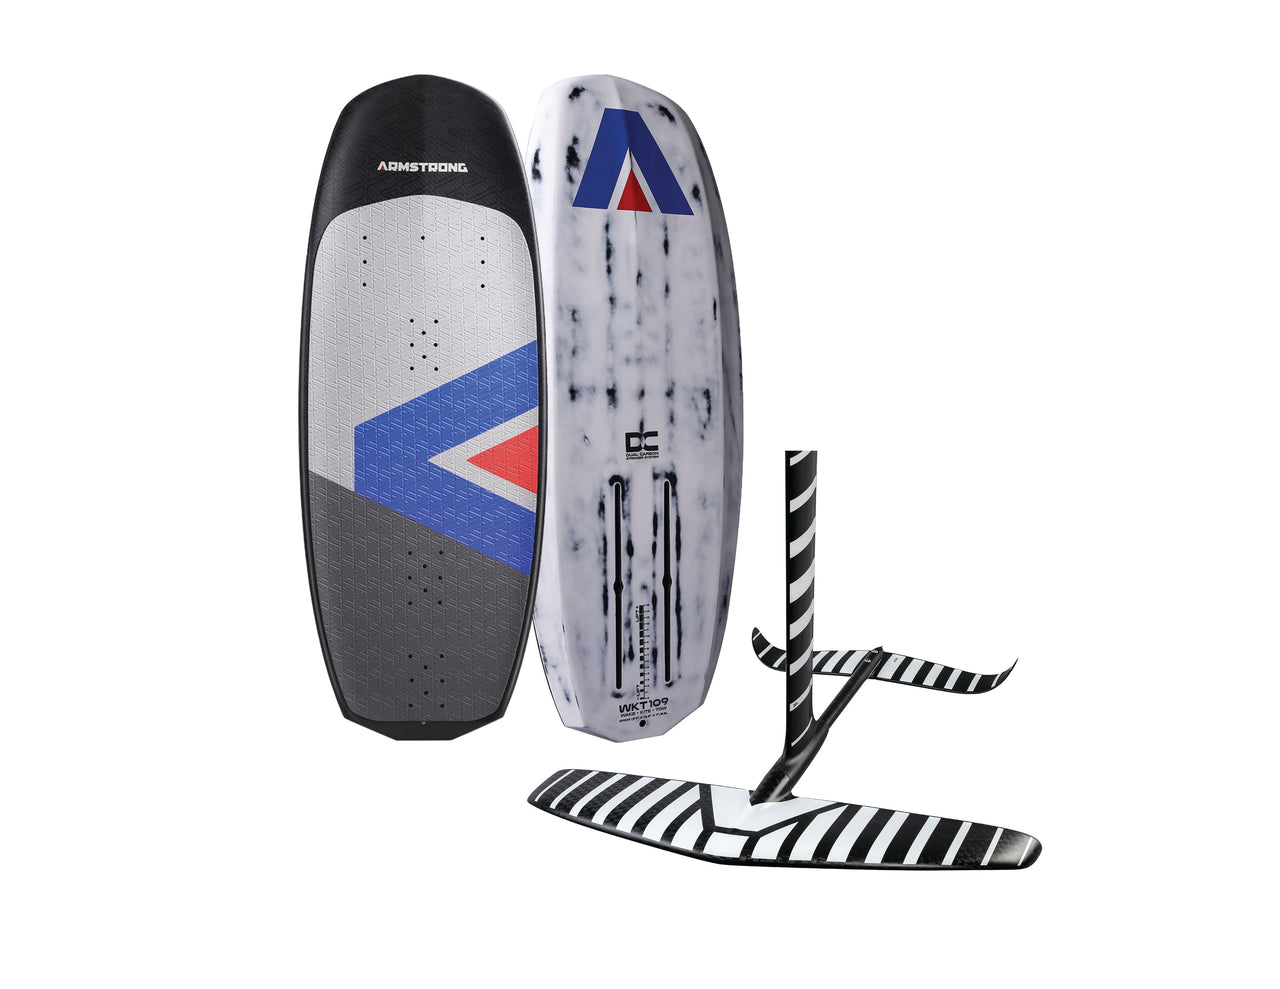 Armstrong Wakefoil Board W/ Armstrong CF1200 Foil Kit Package | 2023 | Pre-Order